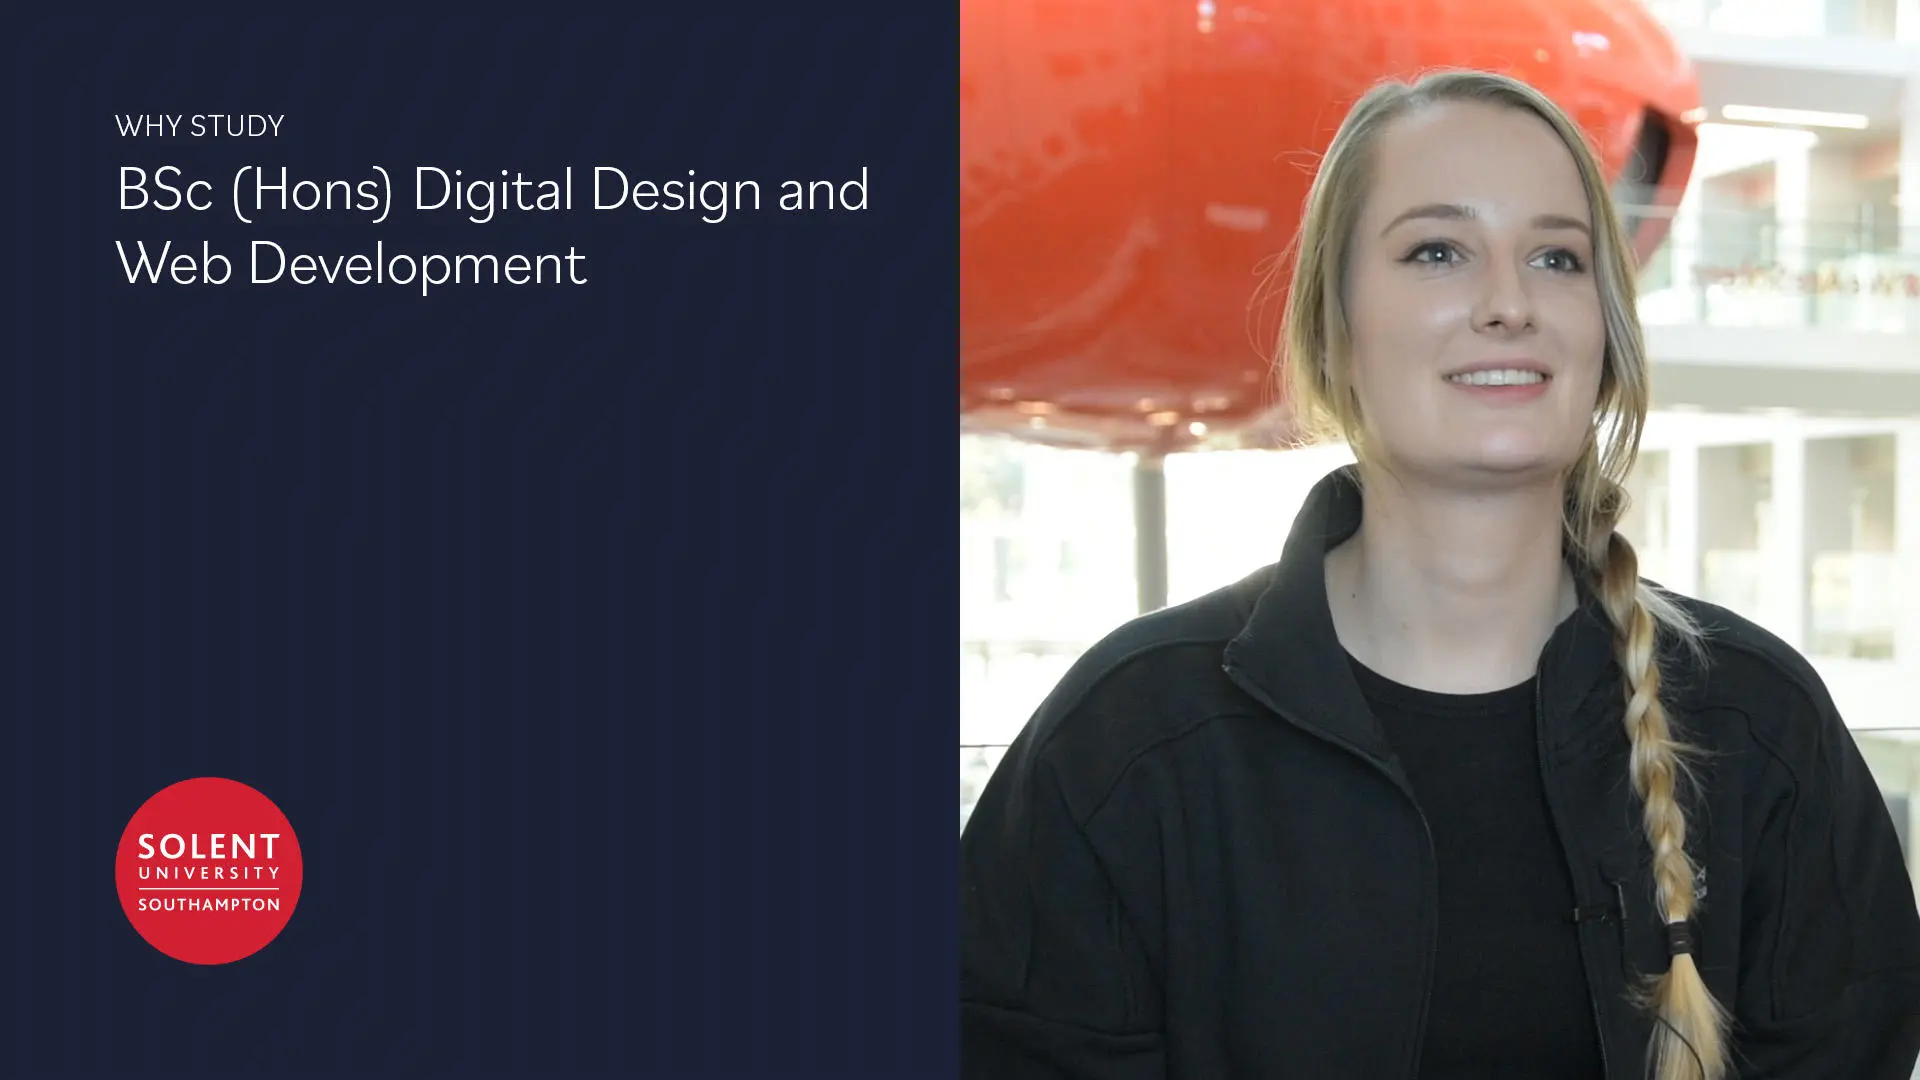 Image reads: Why study BSc (Hons) Digital Design and Web Development